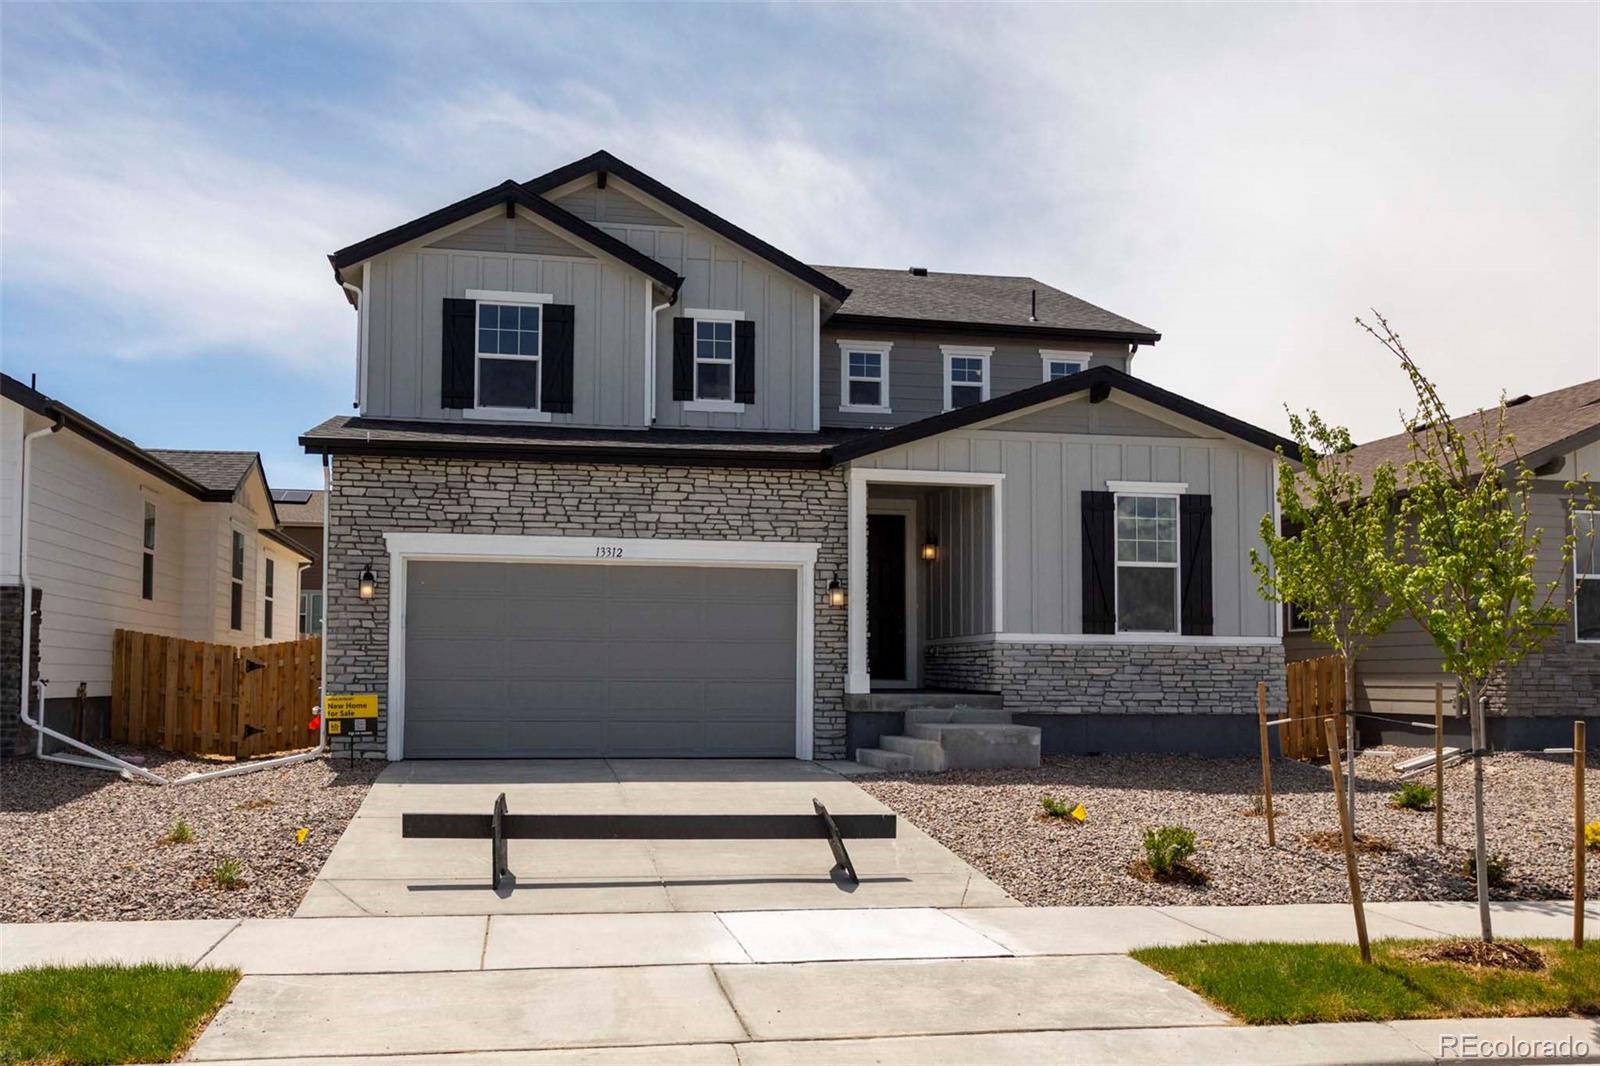 13312 E 110th Way, commerce city MLS: 3206601 Beds: 3 Baths: 3 Price: $642,000